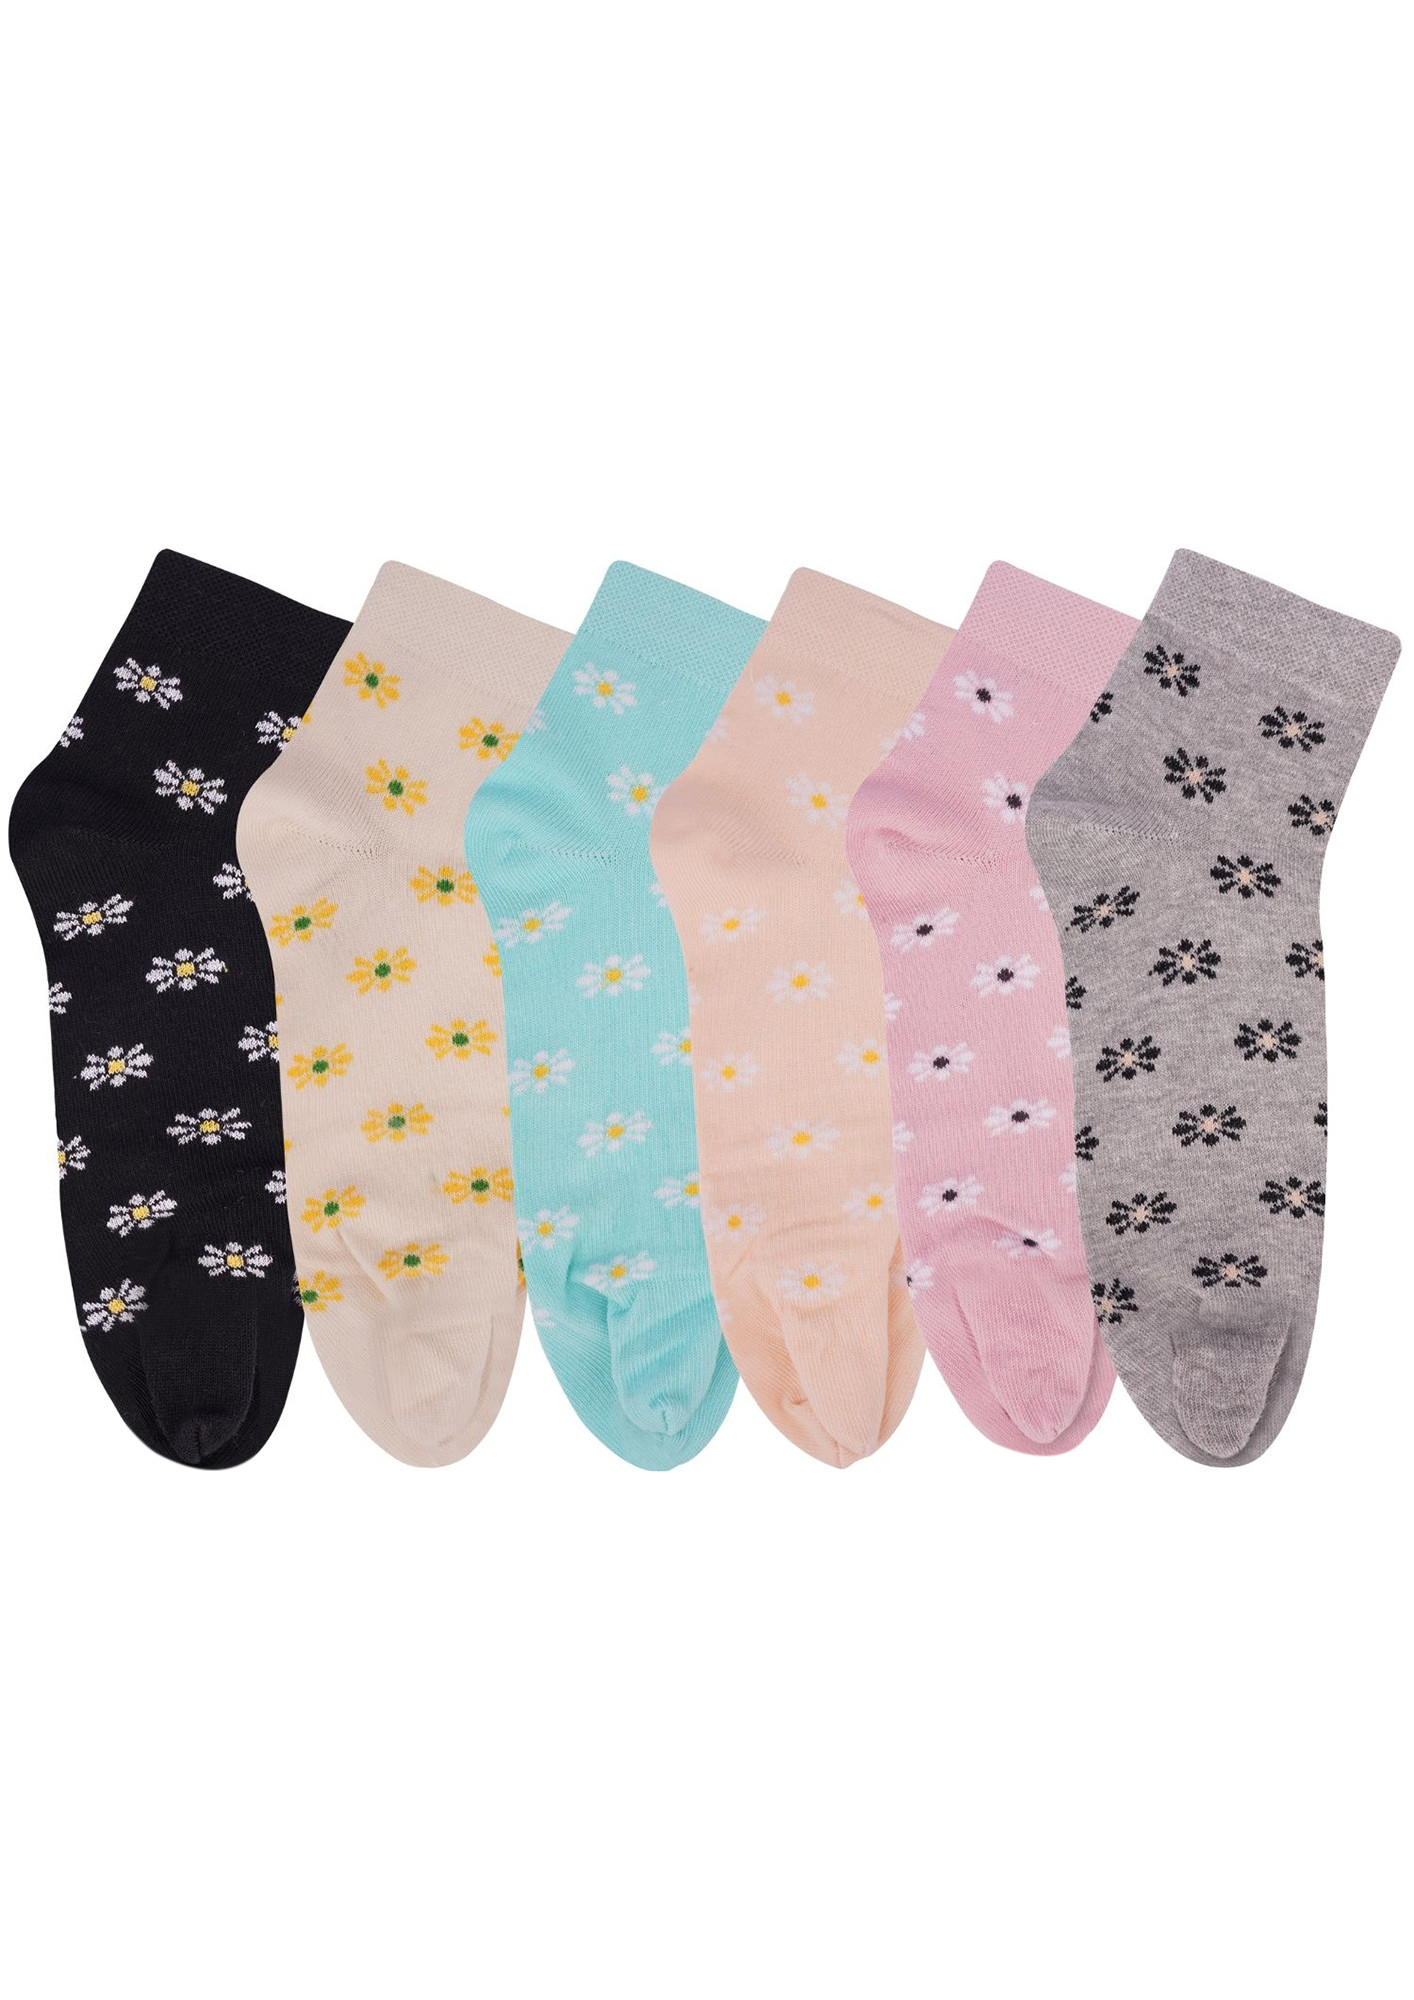 N2S NEXT2SKIN Women's Cotton Ankle Length Thumb Flower Pattern Socks - Pack of 6 Pairs (Multicolor)